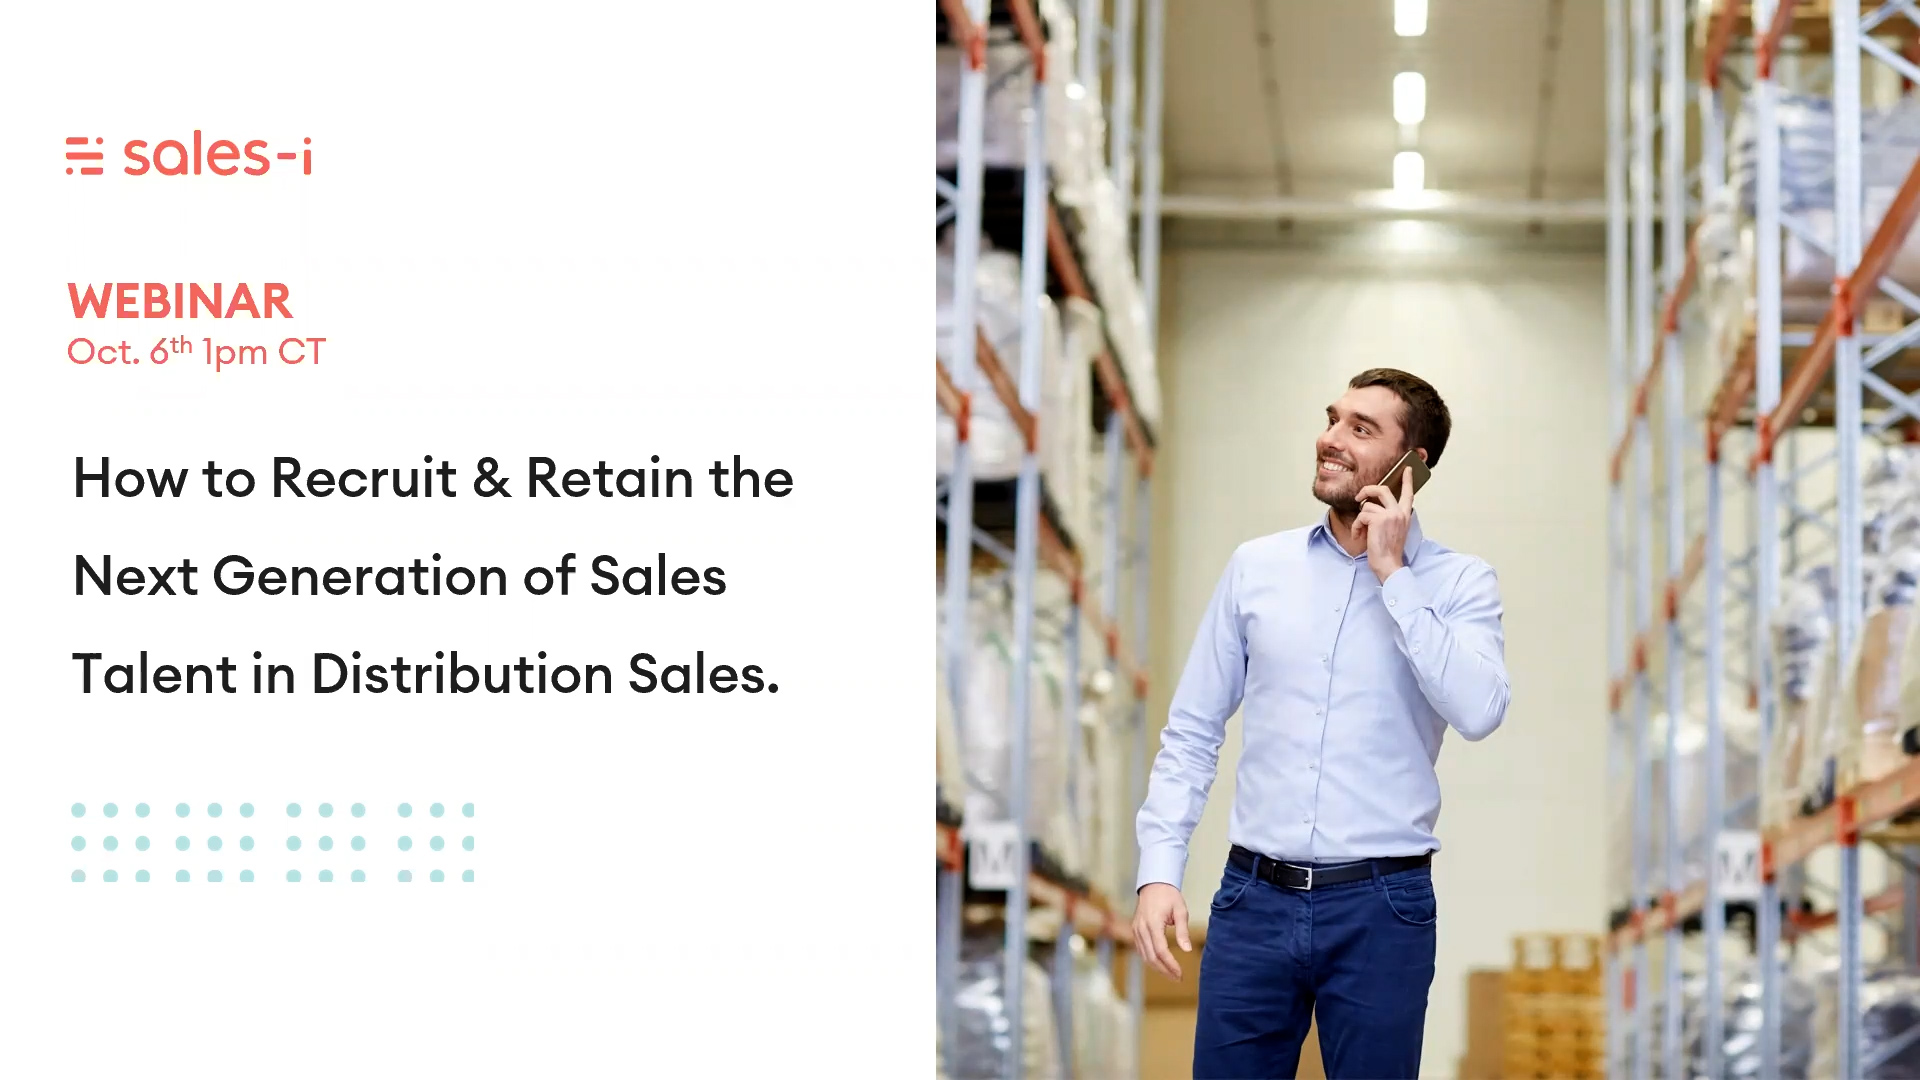 How to recruit & retain the next generation of sales talent in distribution_1920x1080_1